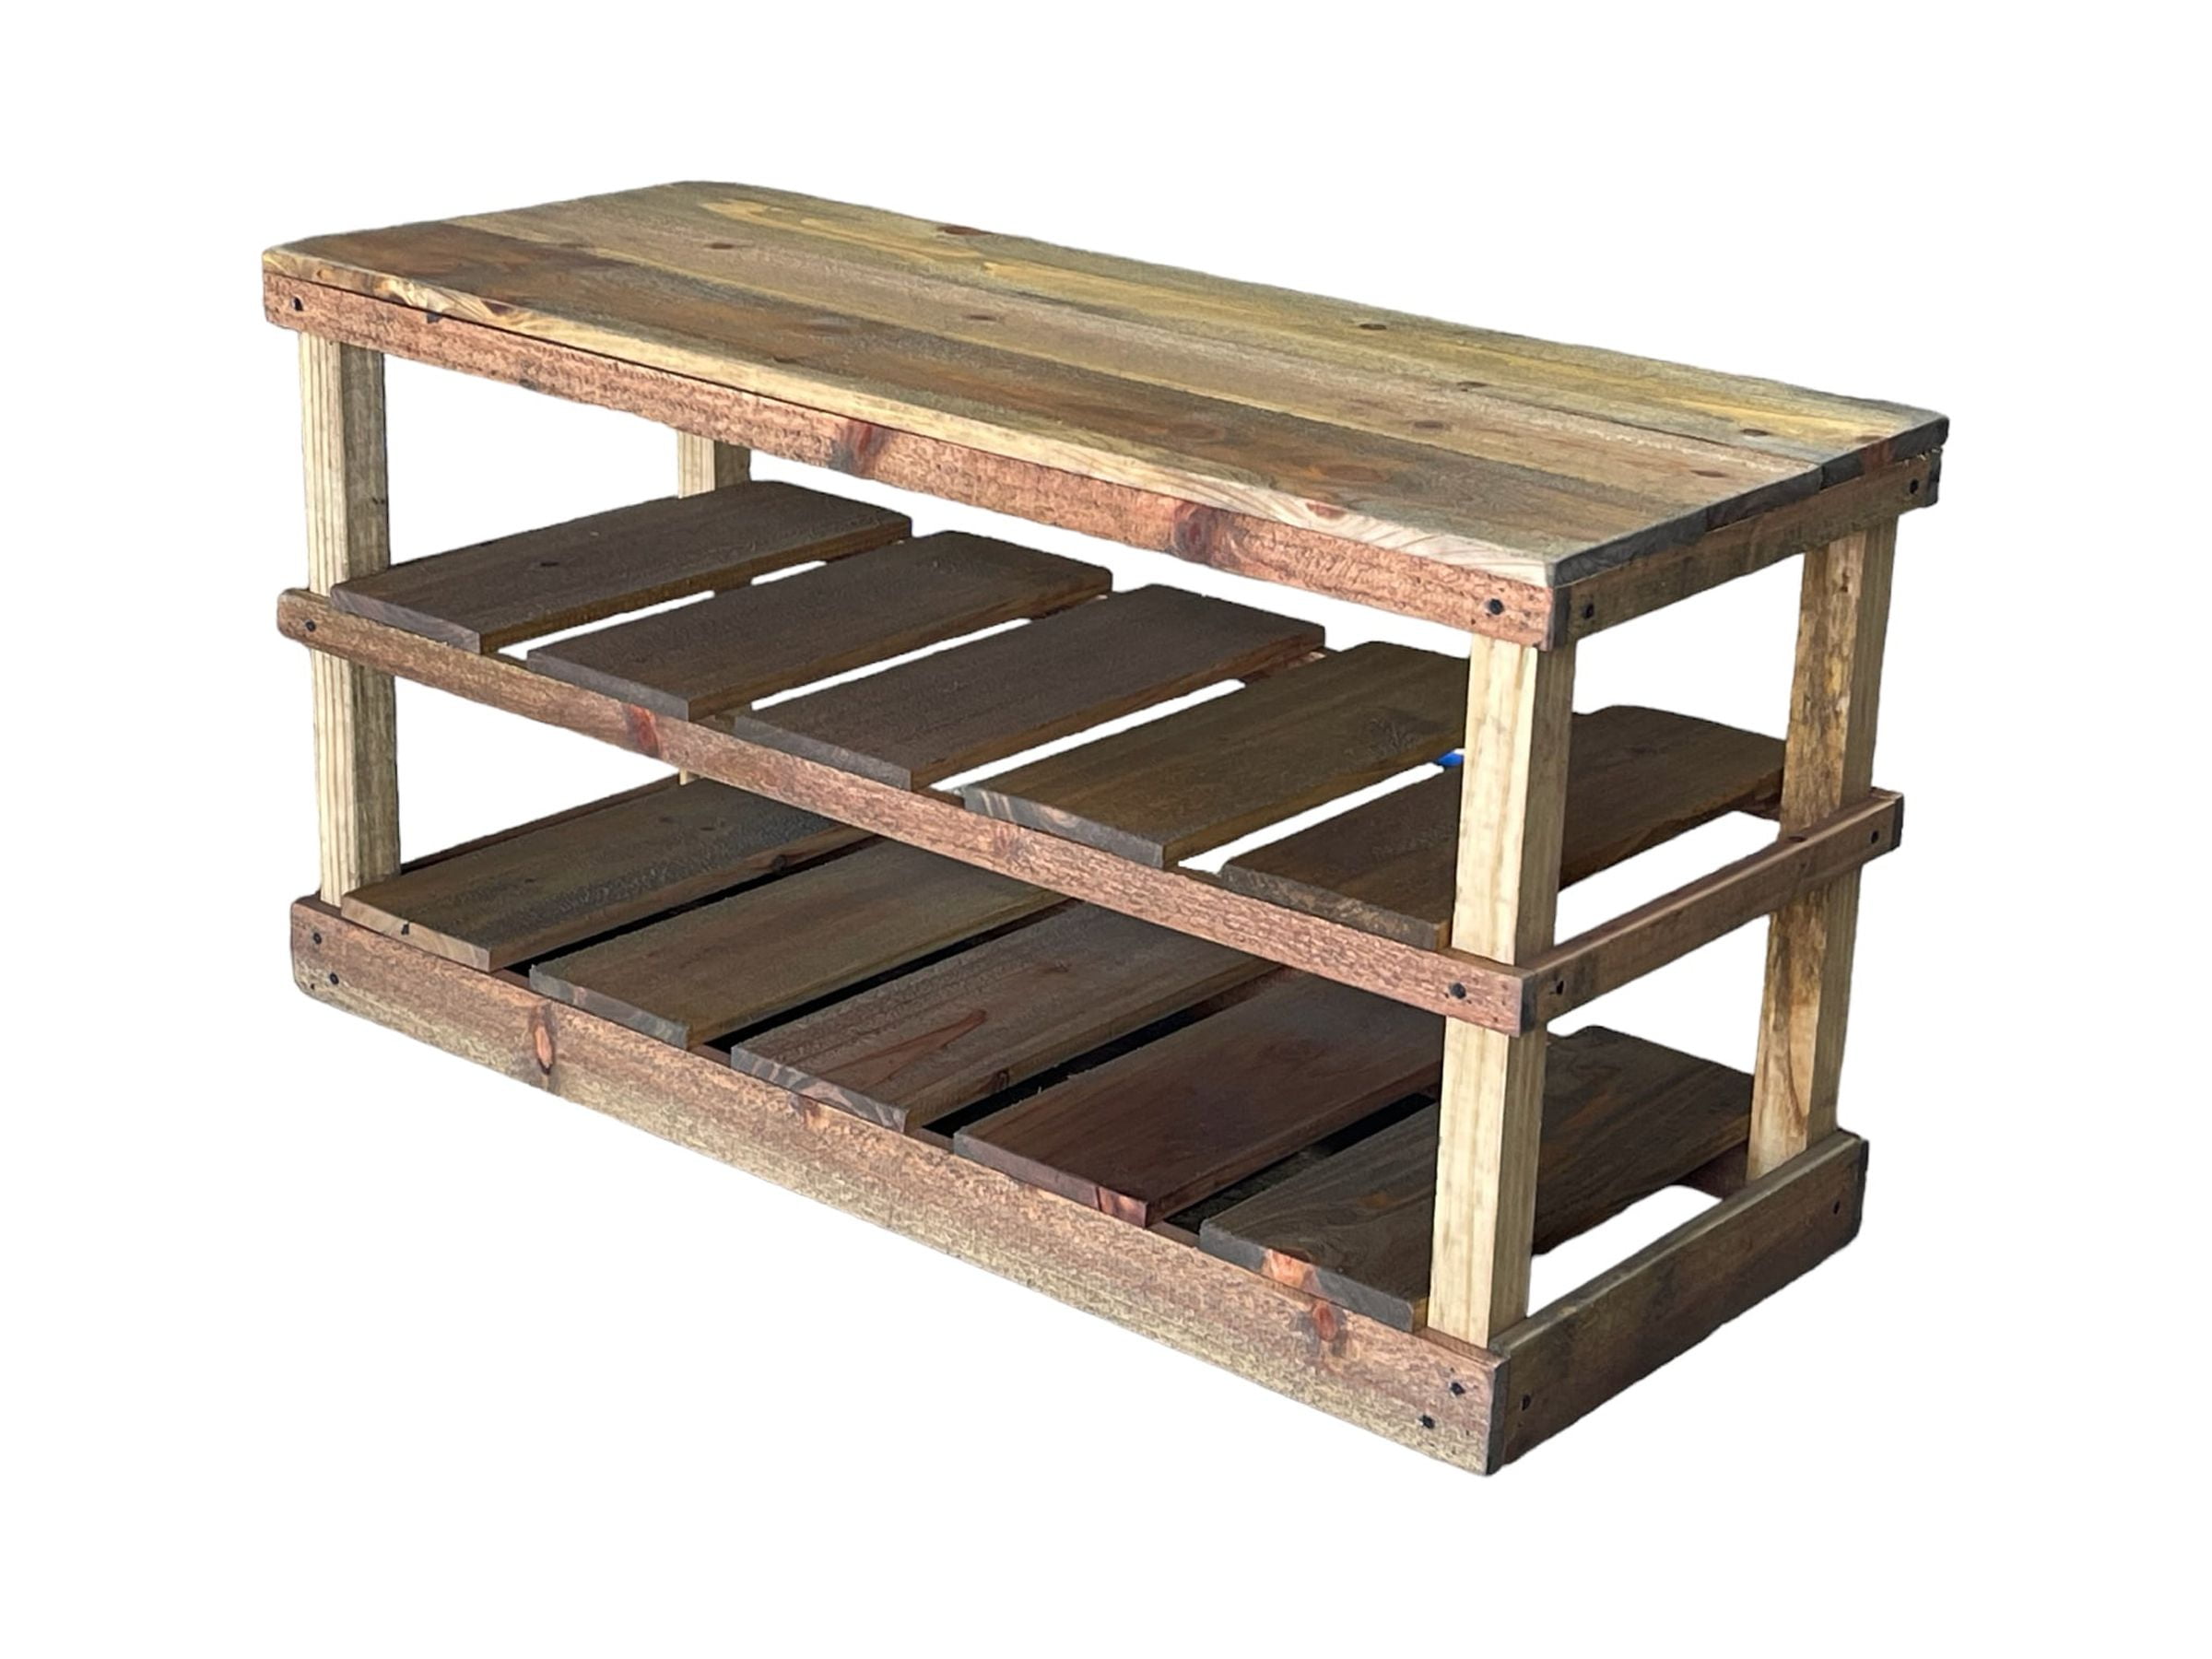 36" Woven Paths 2-Tier Shoe Rack Wood Bench (Brown) $52 + Free Shipping